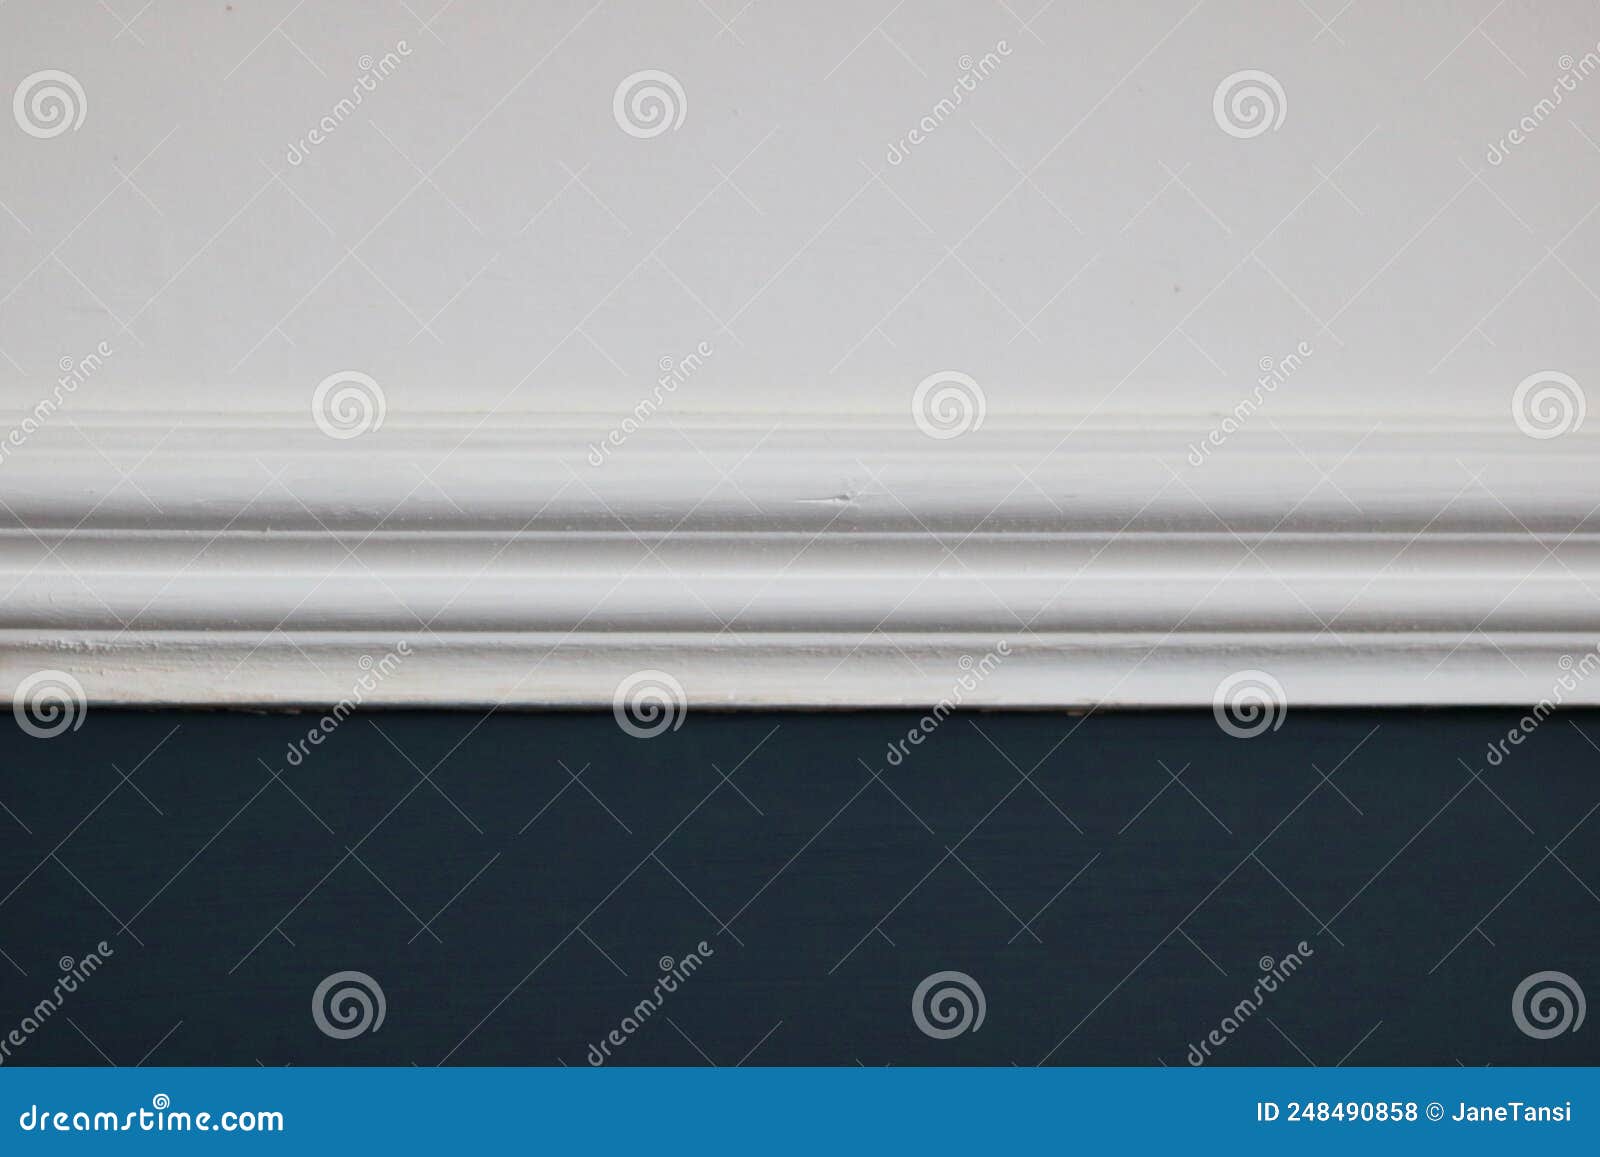 victorian  feature - dado rail painted white on white and dark teal wall